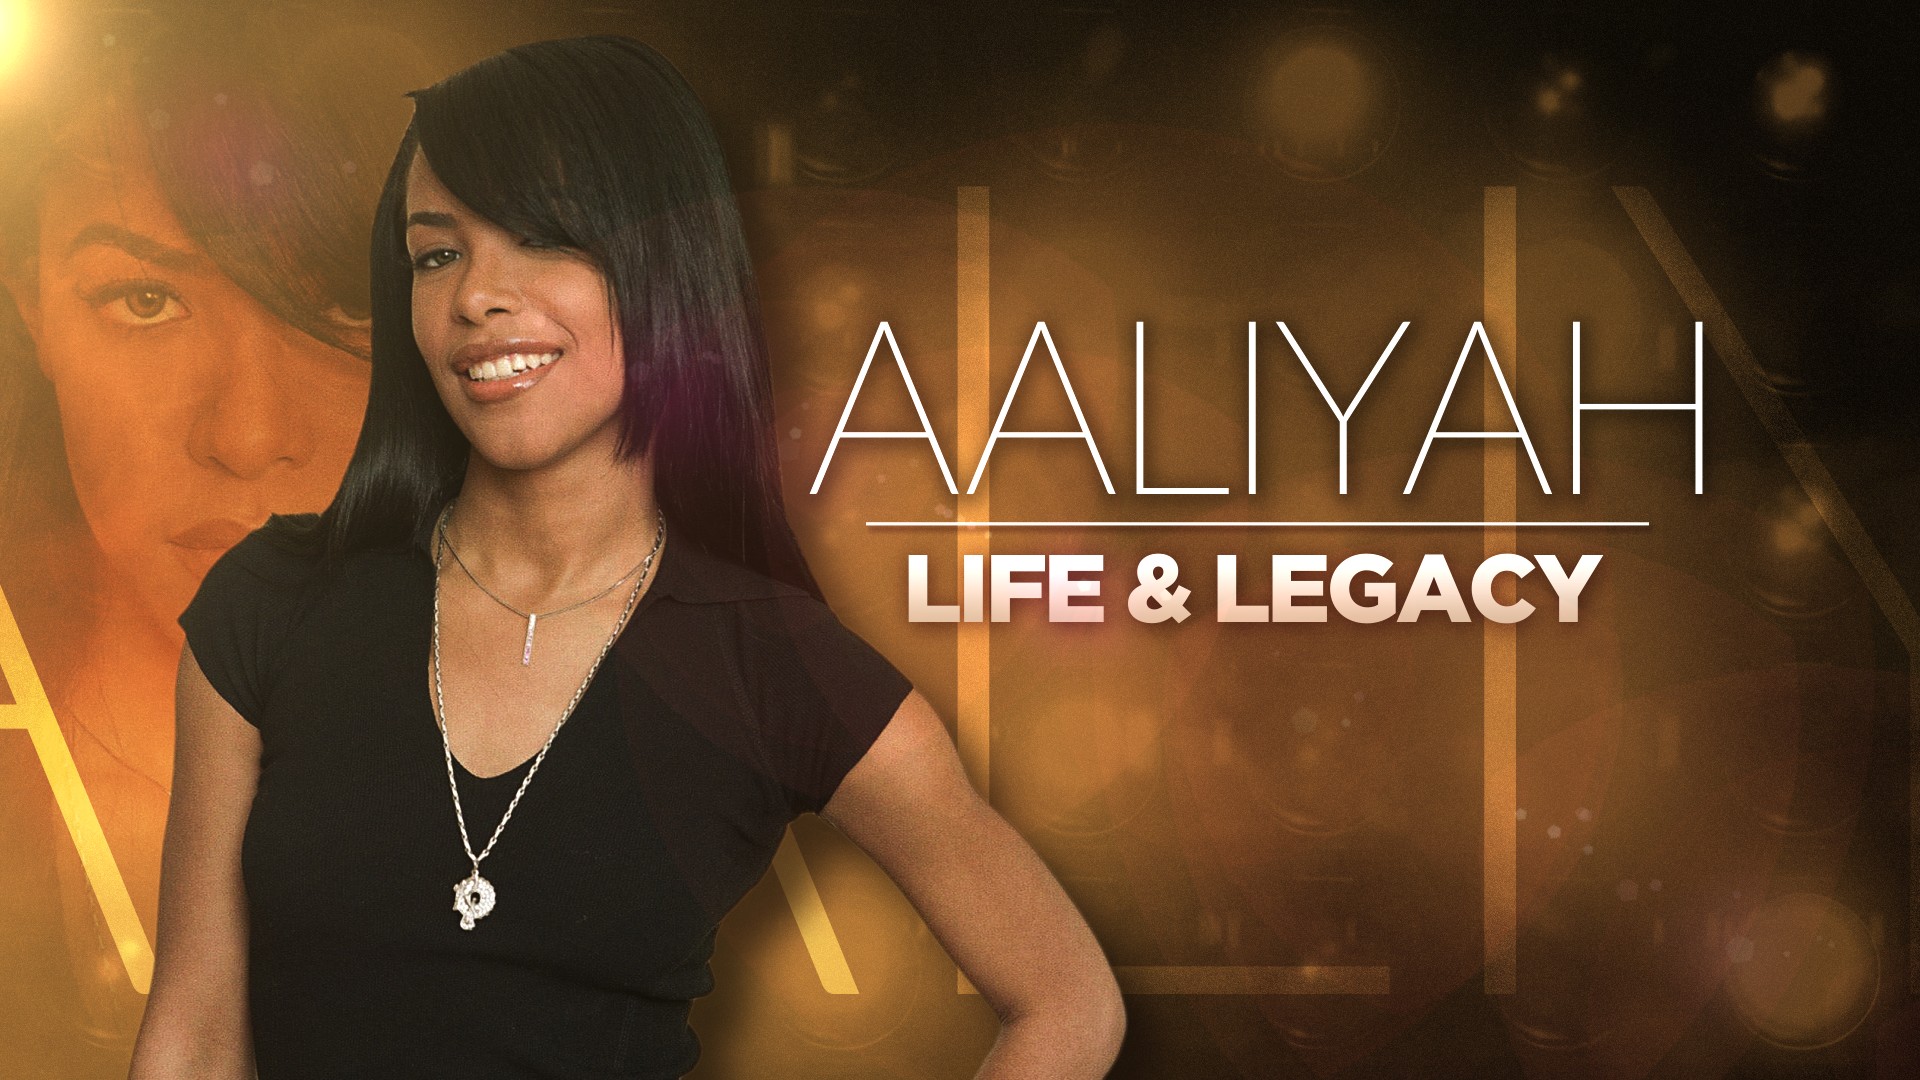 Aaliyah cremated was Family finds